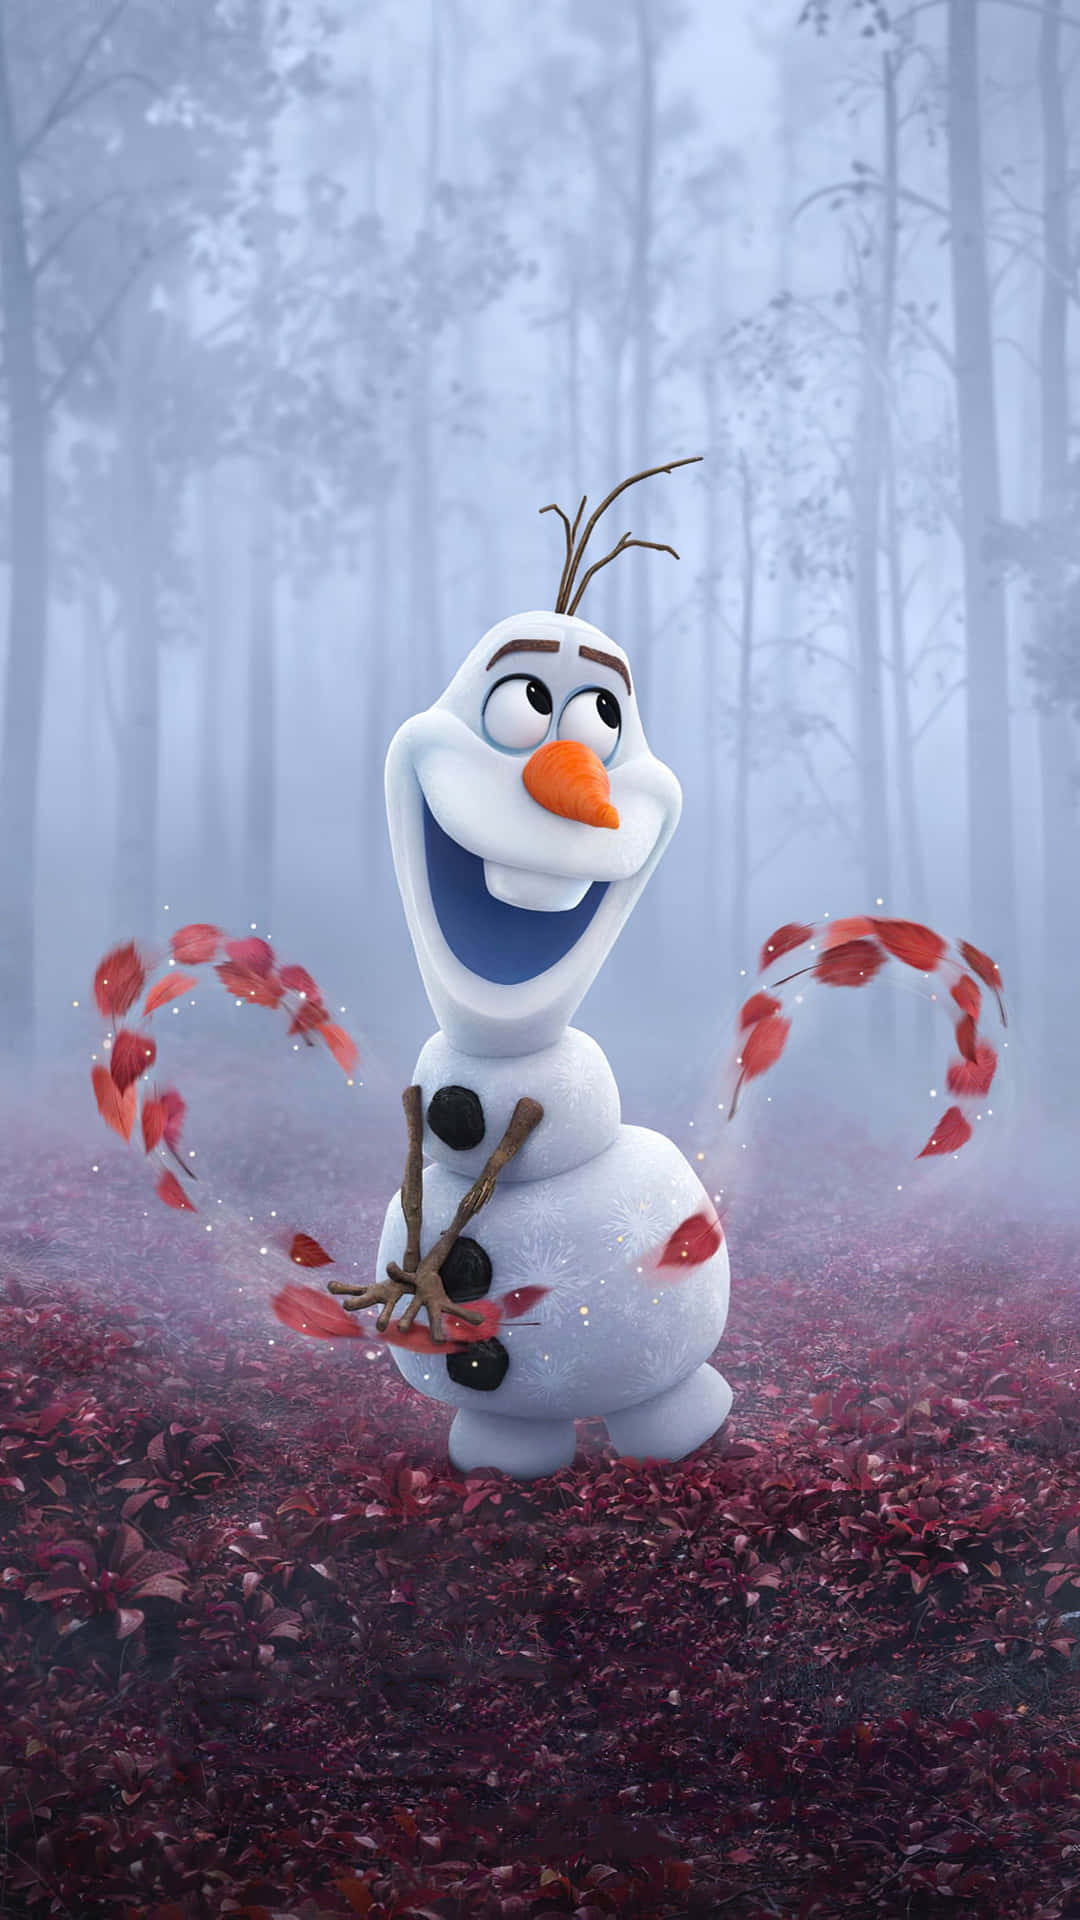 Enjoying the Beauty of Nature with Olaf!